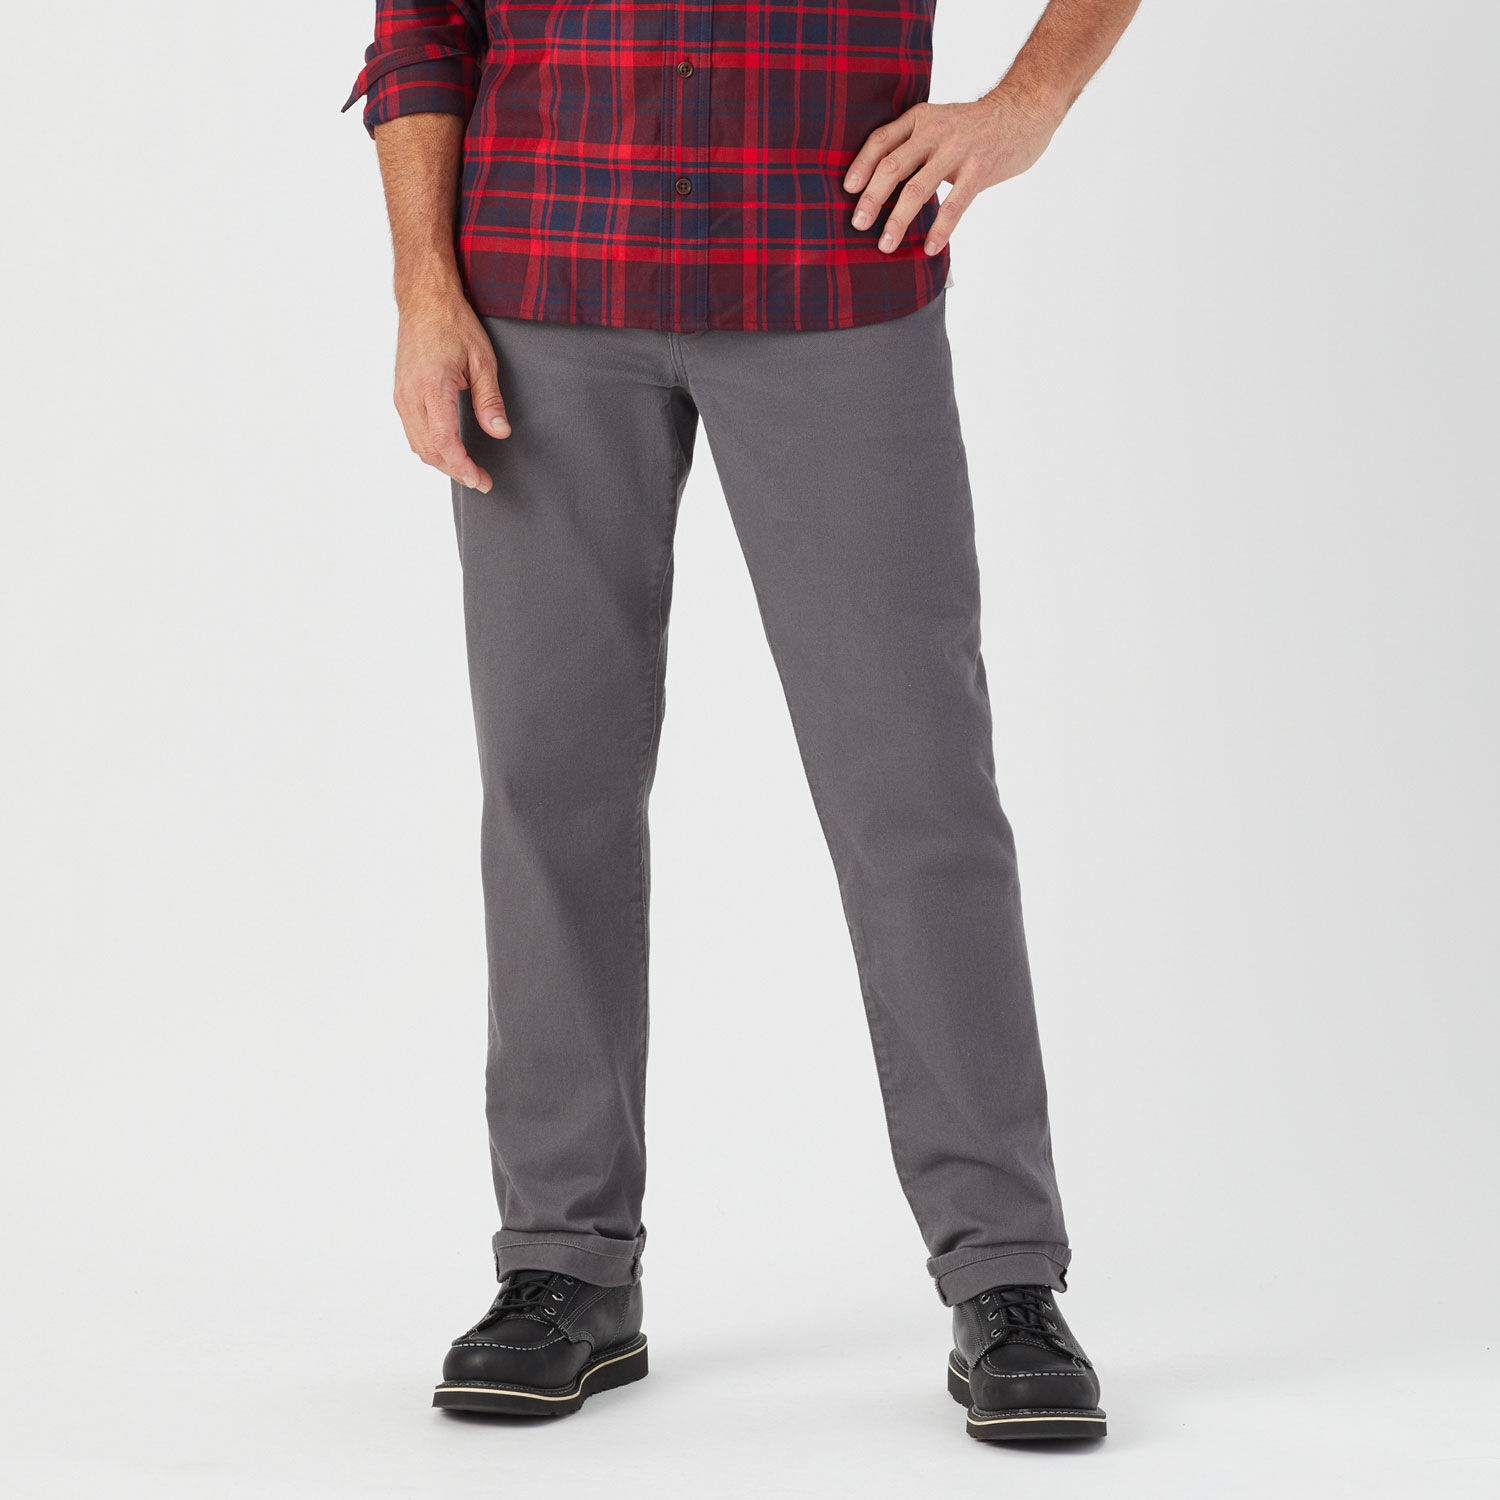 Men's Best Made Linen Pants | Duluth Trading Company